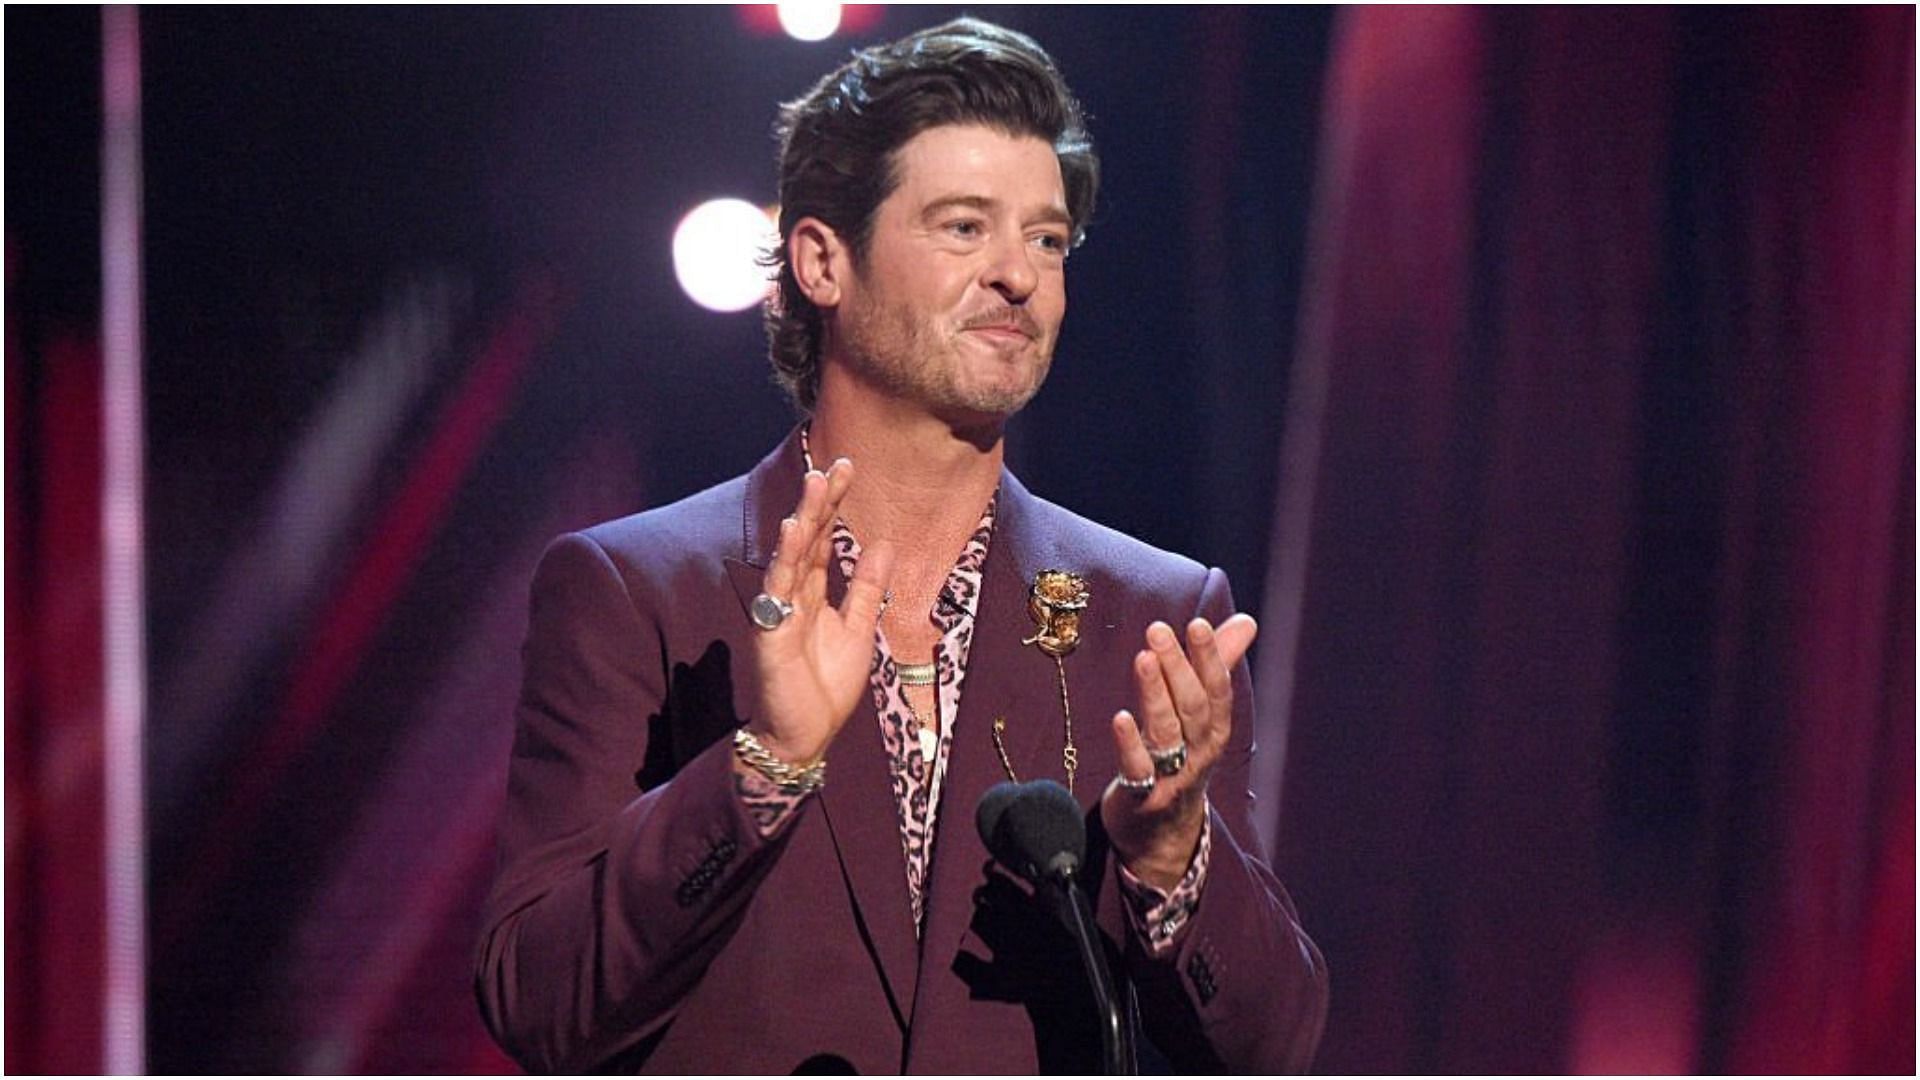 Robin Thicke is a famous singer, songwriter and record producer (Image via Kevin Mazur/Getty Images)